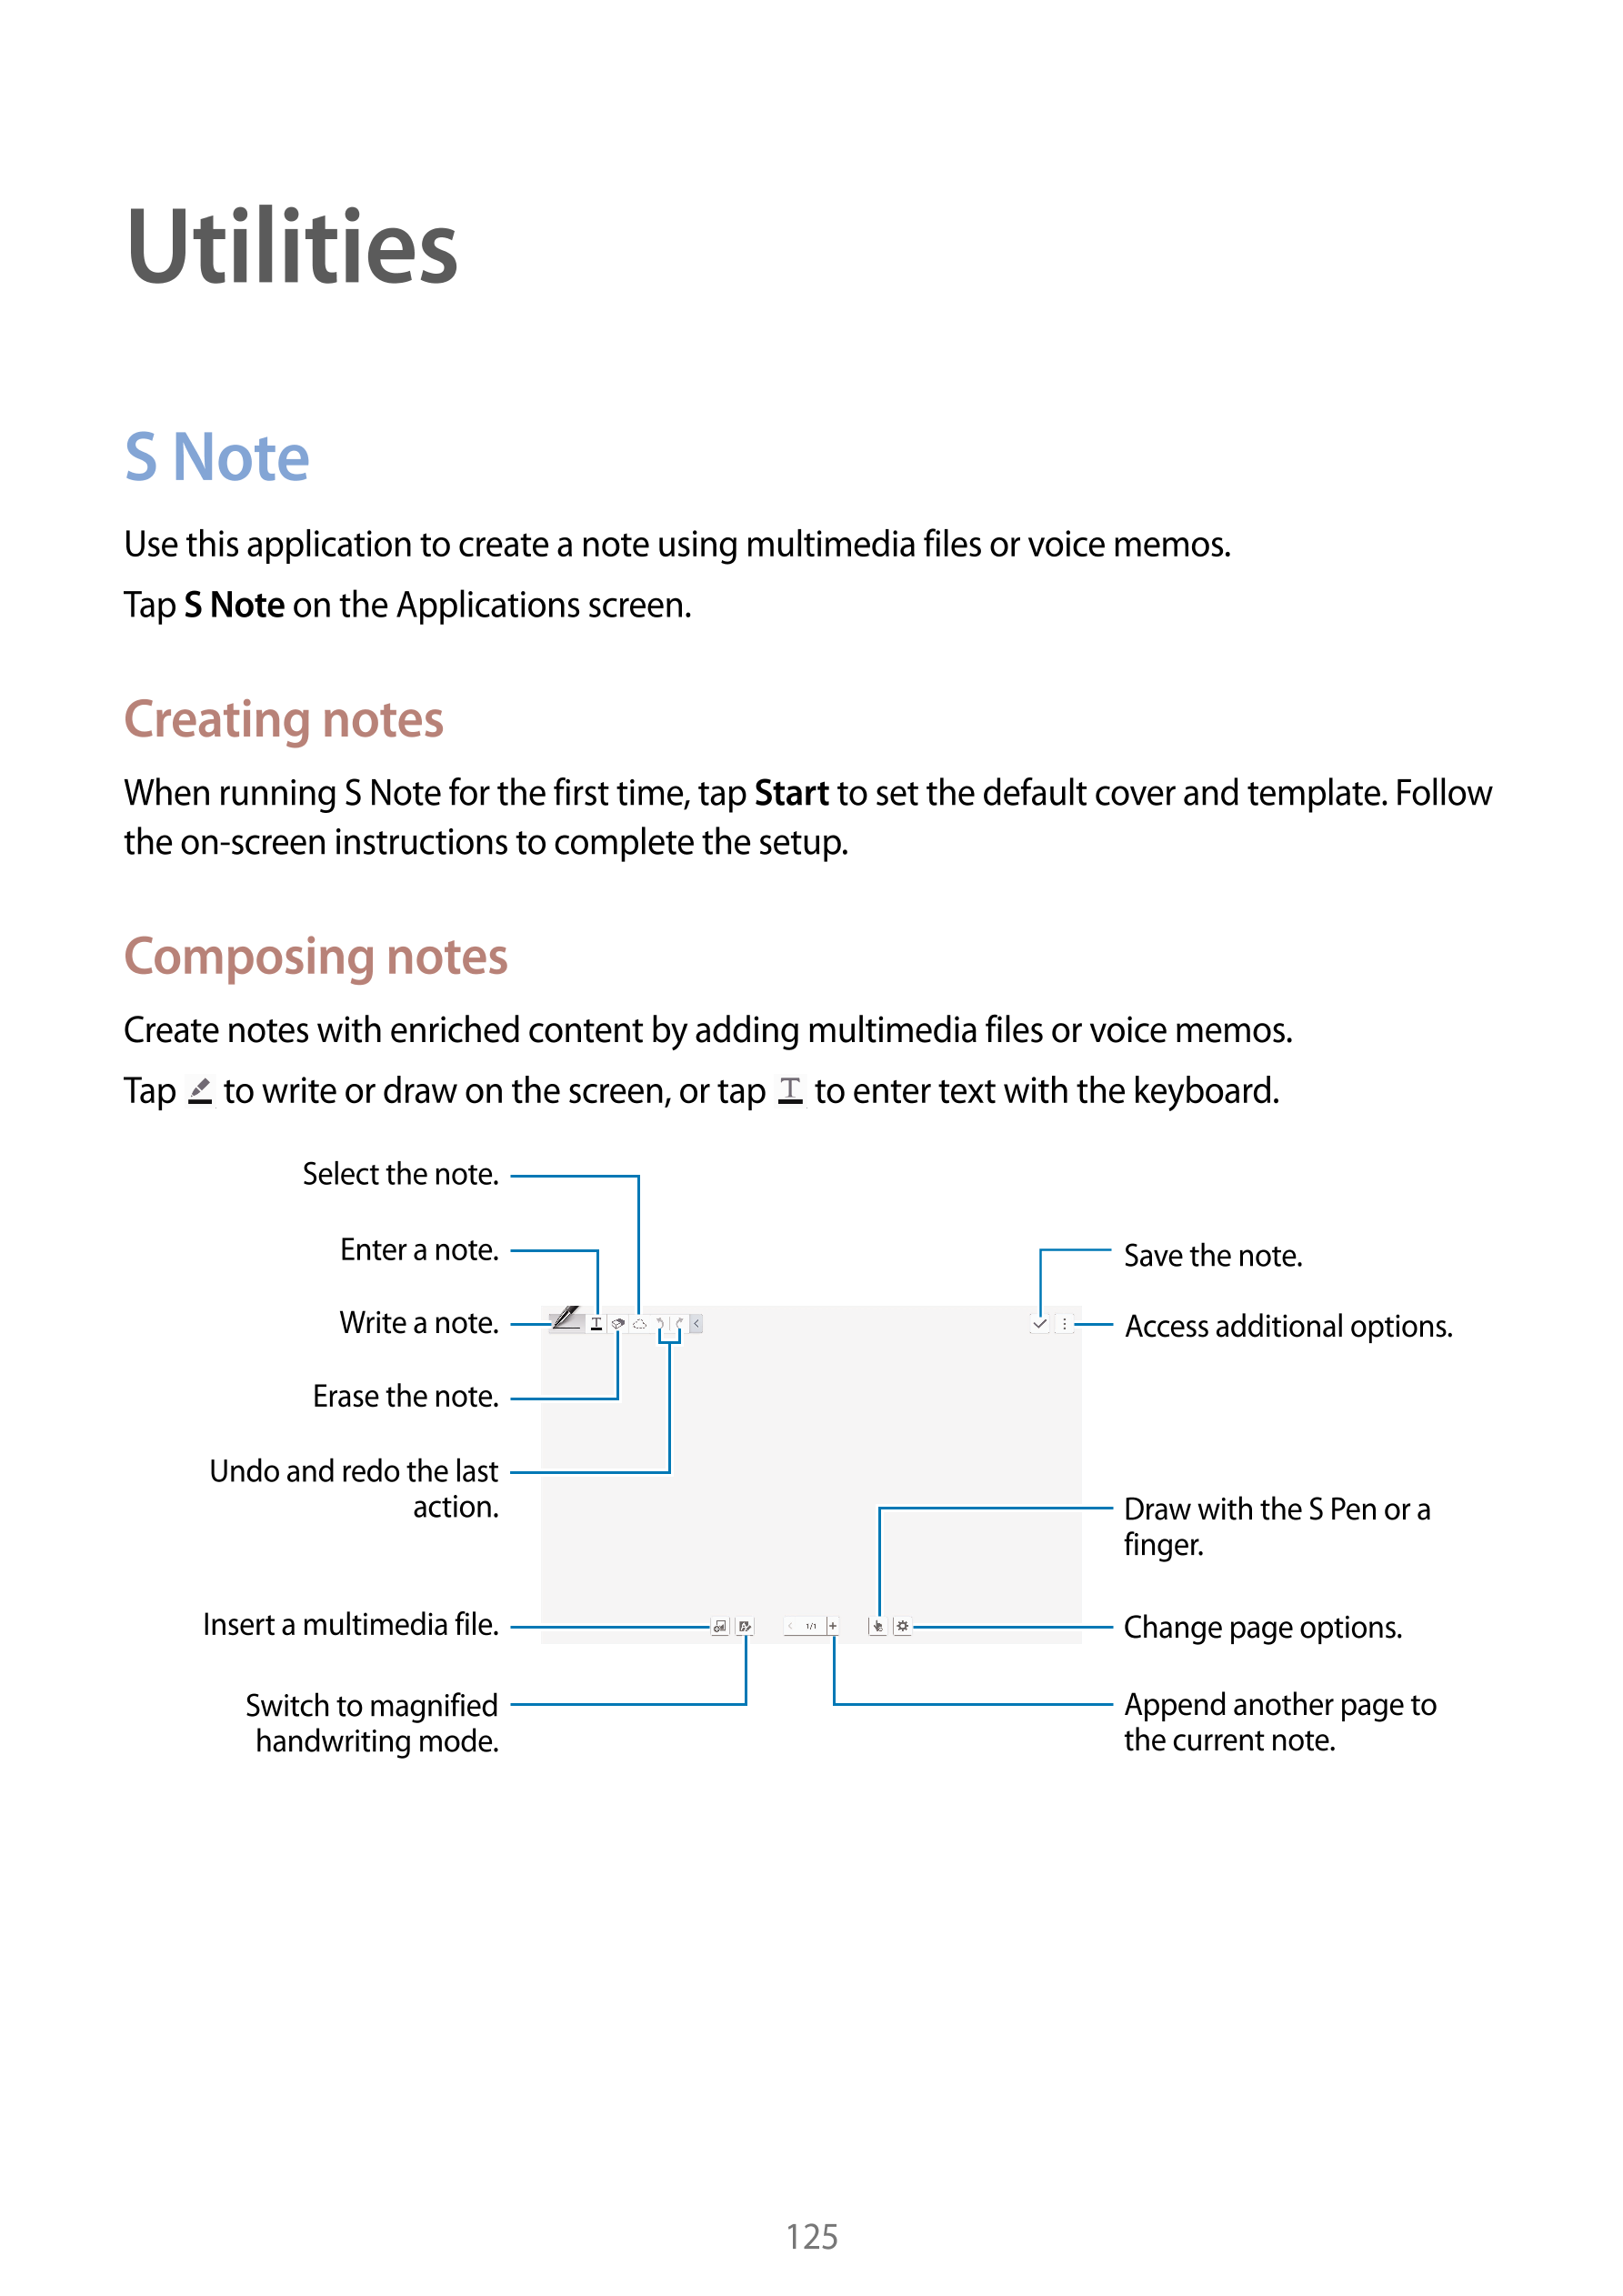 Utilities
S Note
Use this application to create a note using multimedia files or voice memos.
Tap  S Note on the Applications sc